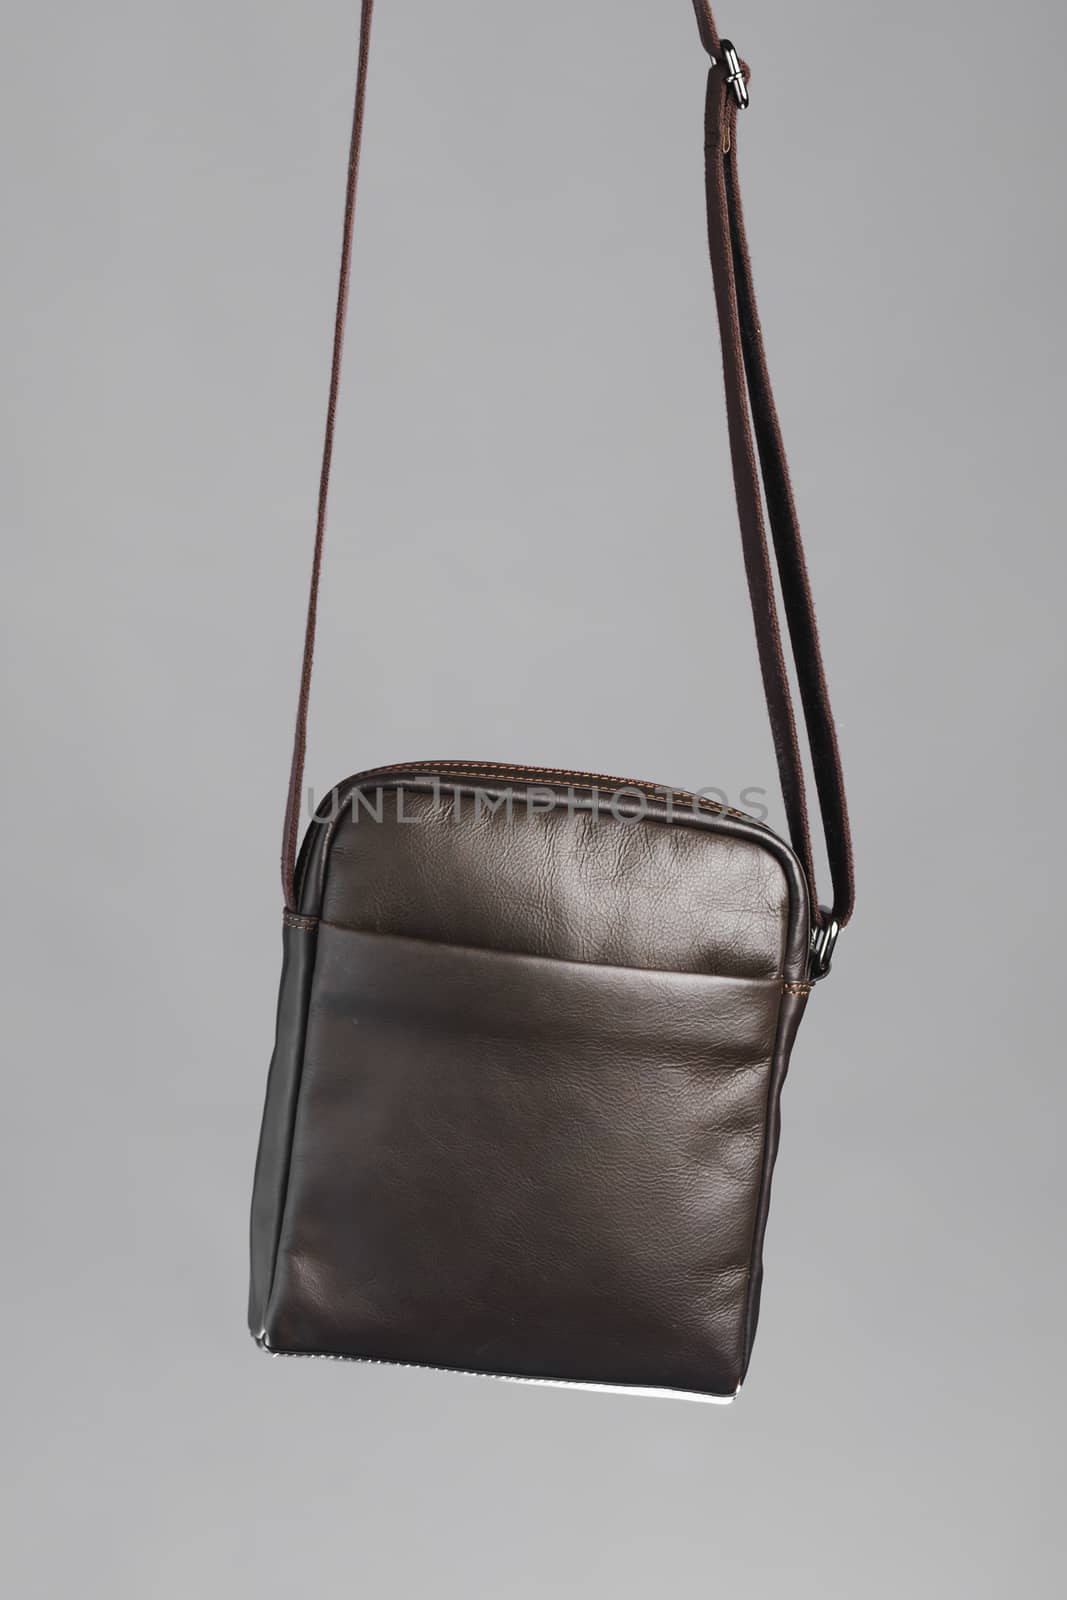 male brown leather bag, gray background by nikkytok